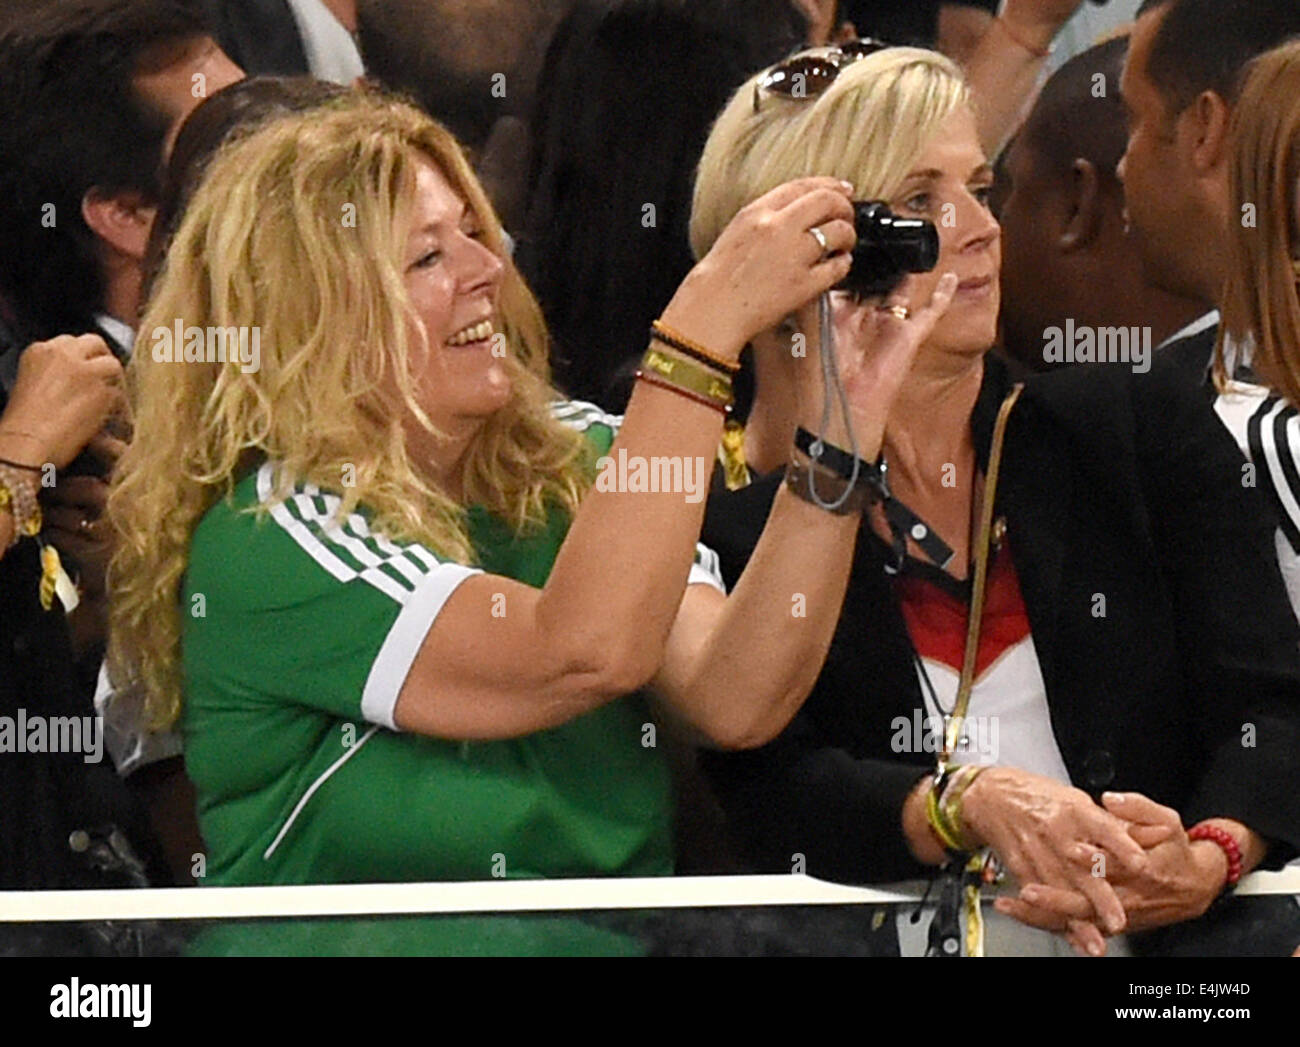 Rio de Janeiro, Brazil. 13th July, 2014. Daniela Loew (L), wife of head coach Joachim Loew of Germany, takes photos in the stands during the FIFA World Cup 2014 final soccer match between Germany and Argentina at the Estadio do Maracana in Rio de Janeiro, Brazil, 13 July 2014. Photo: Marcus Brandt/dpa/Alamy Live News Stock Photo